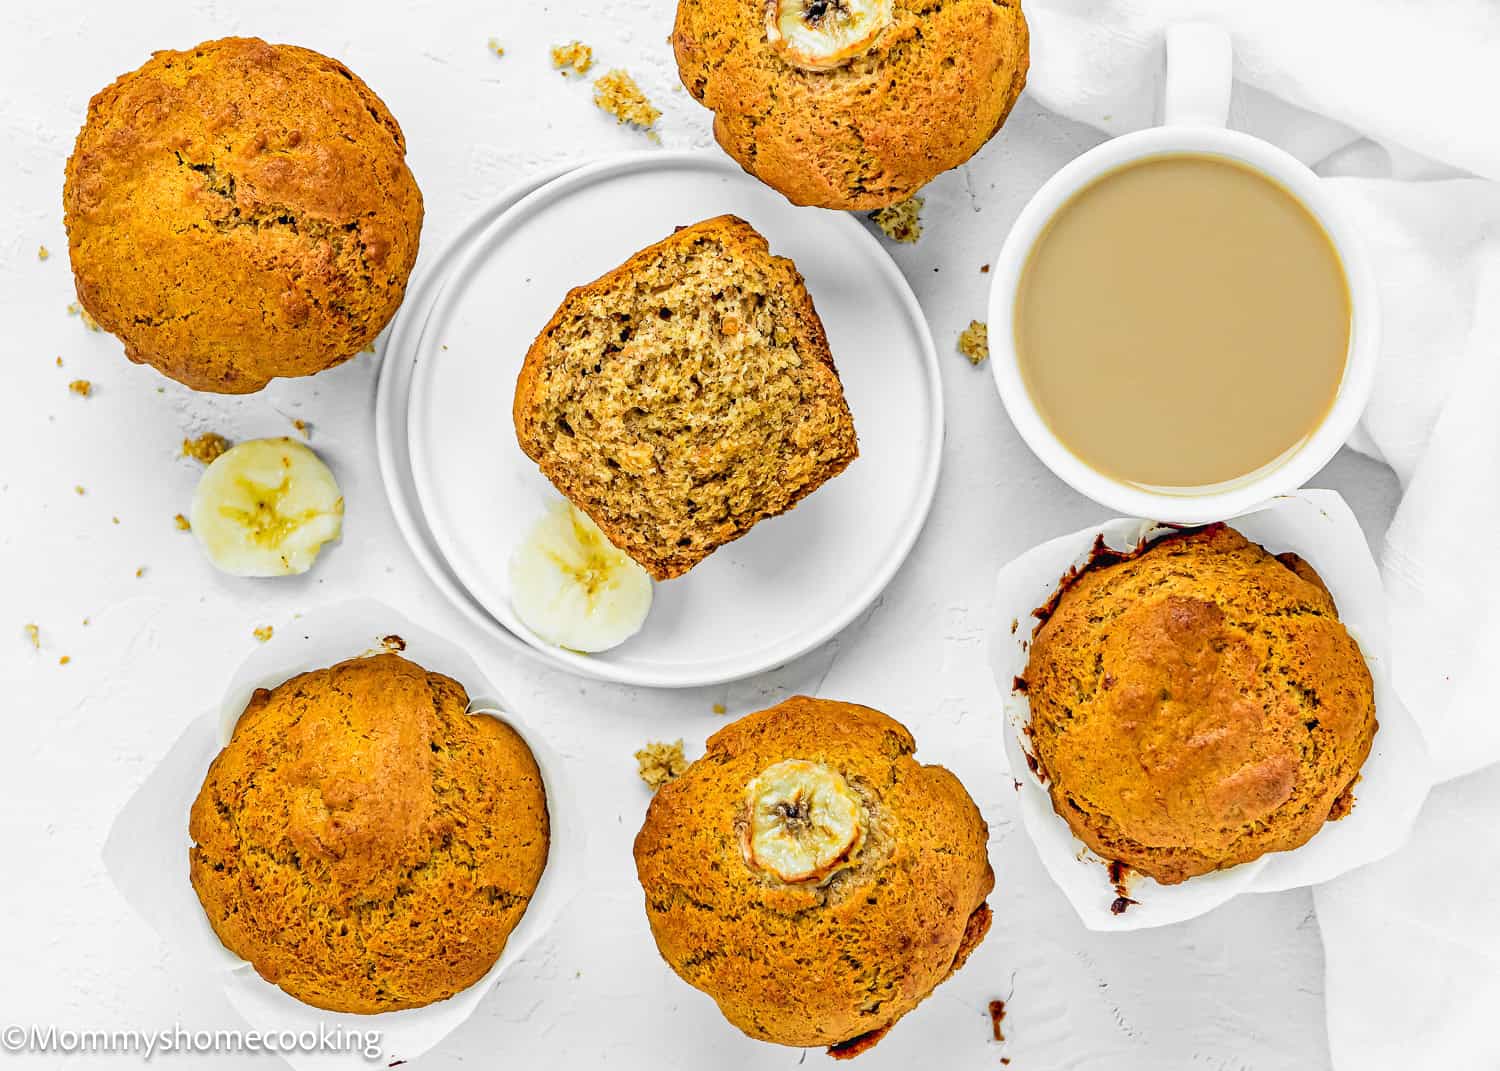 Healthy Easy Banana Muffins over a white surface with a cup of coffee on the side.